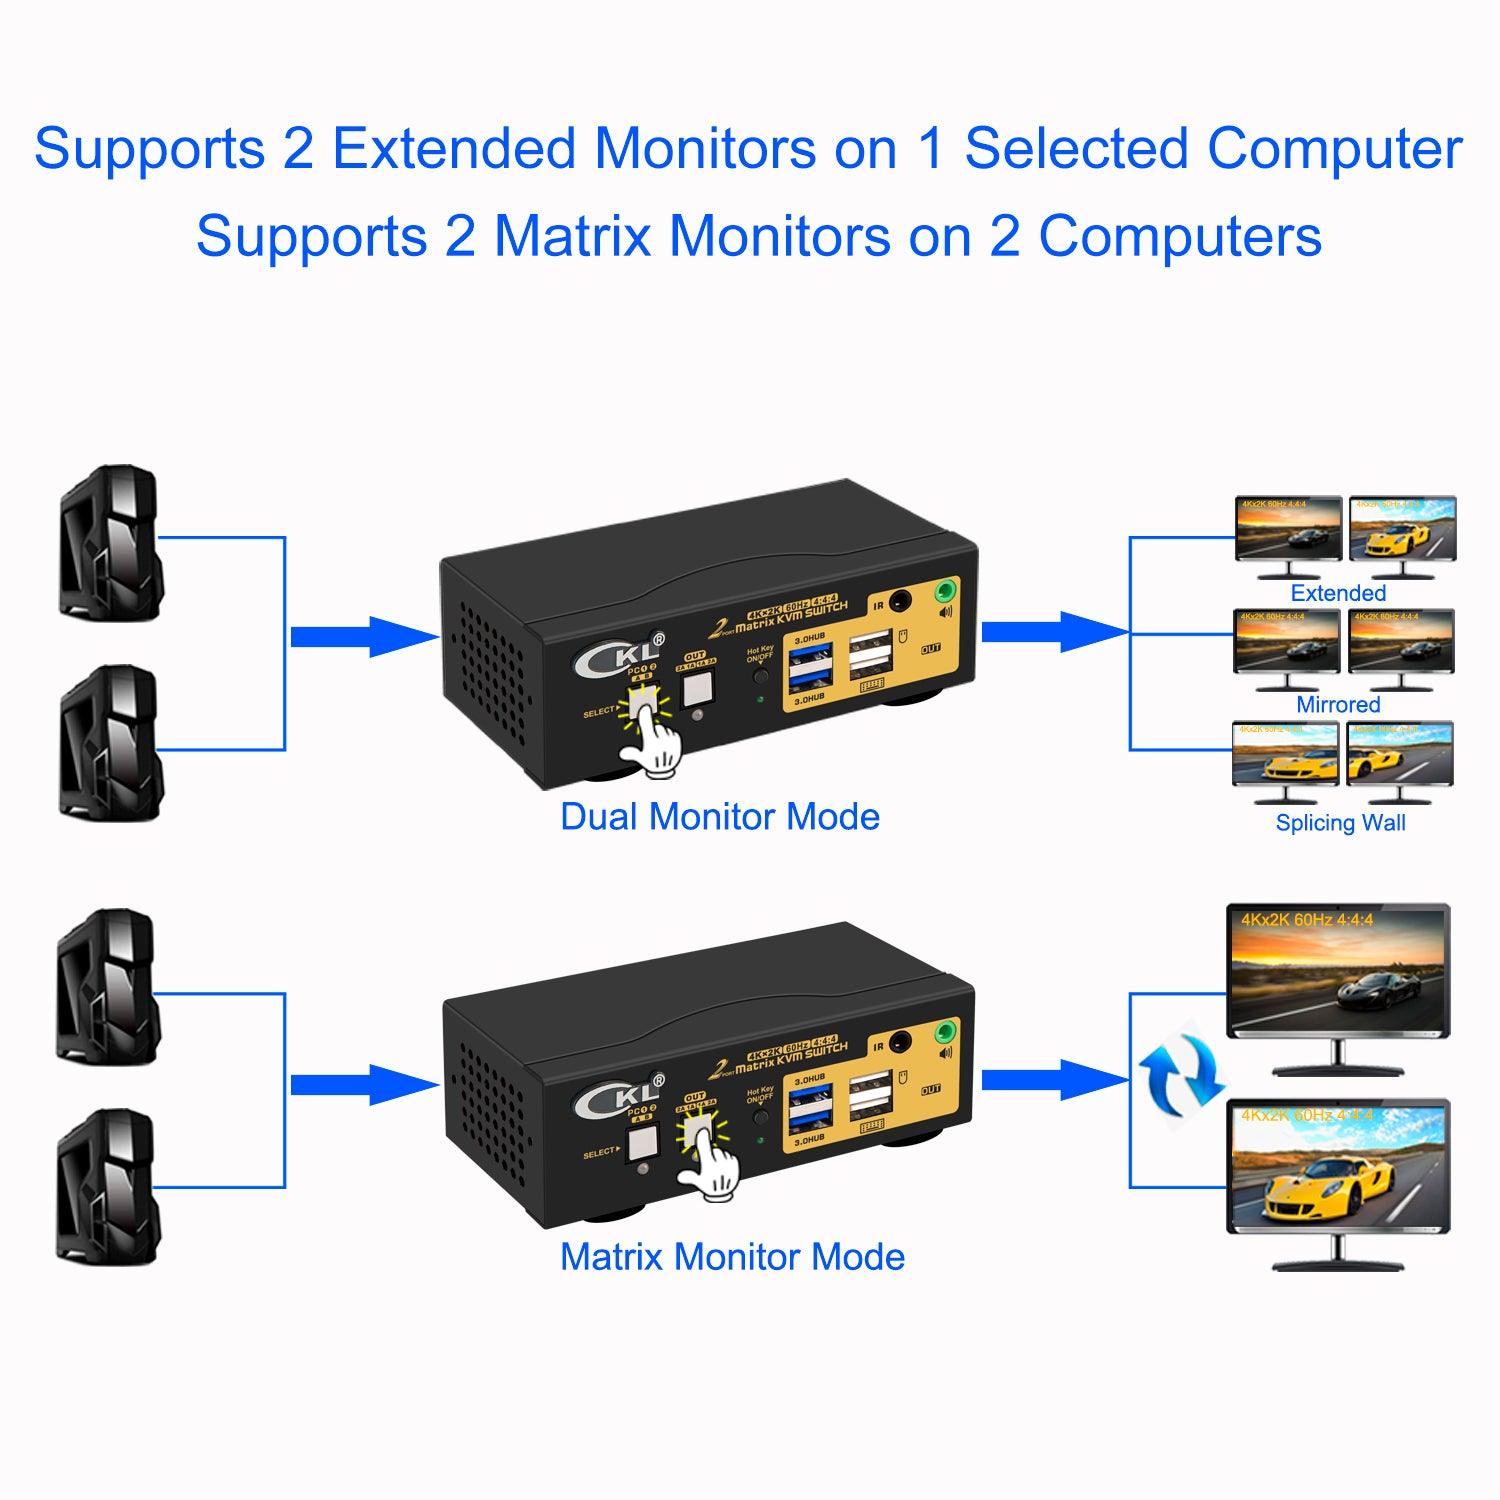 CKL 2x2 Matrix USB Type C +HDMI KVM Switch Dual Monitor USB 3.0 4K 60Hz, PC Monitor Keyboard Mouse Peripherals Sharing Box with Cables for 2 Computers or Laptops CKL-622TH-M - CKL KVM Switches